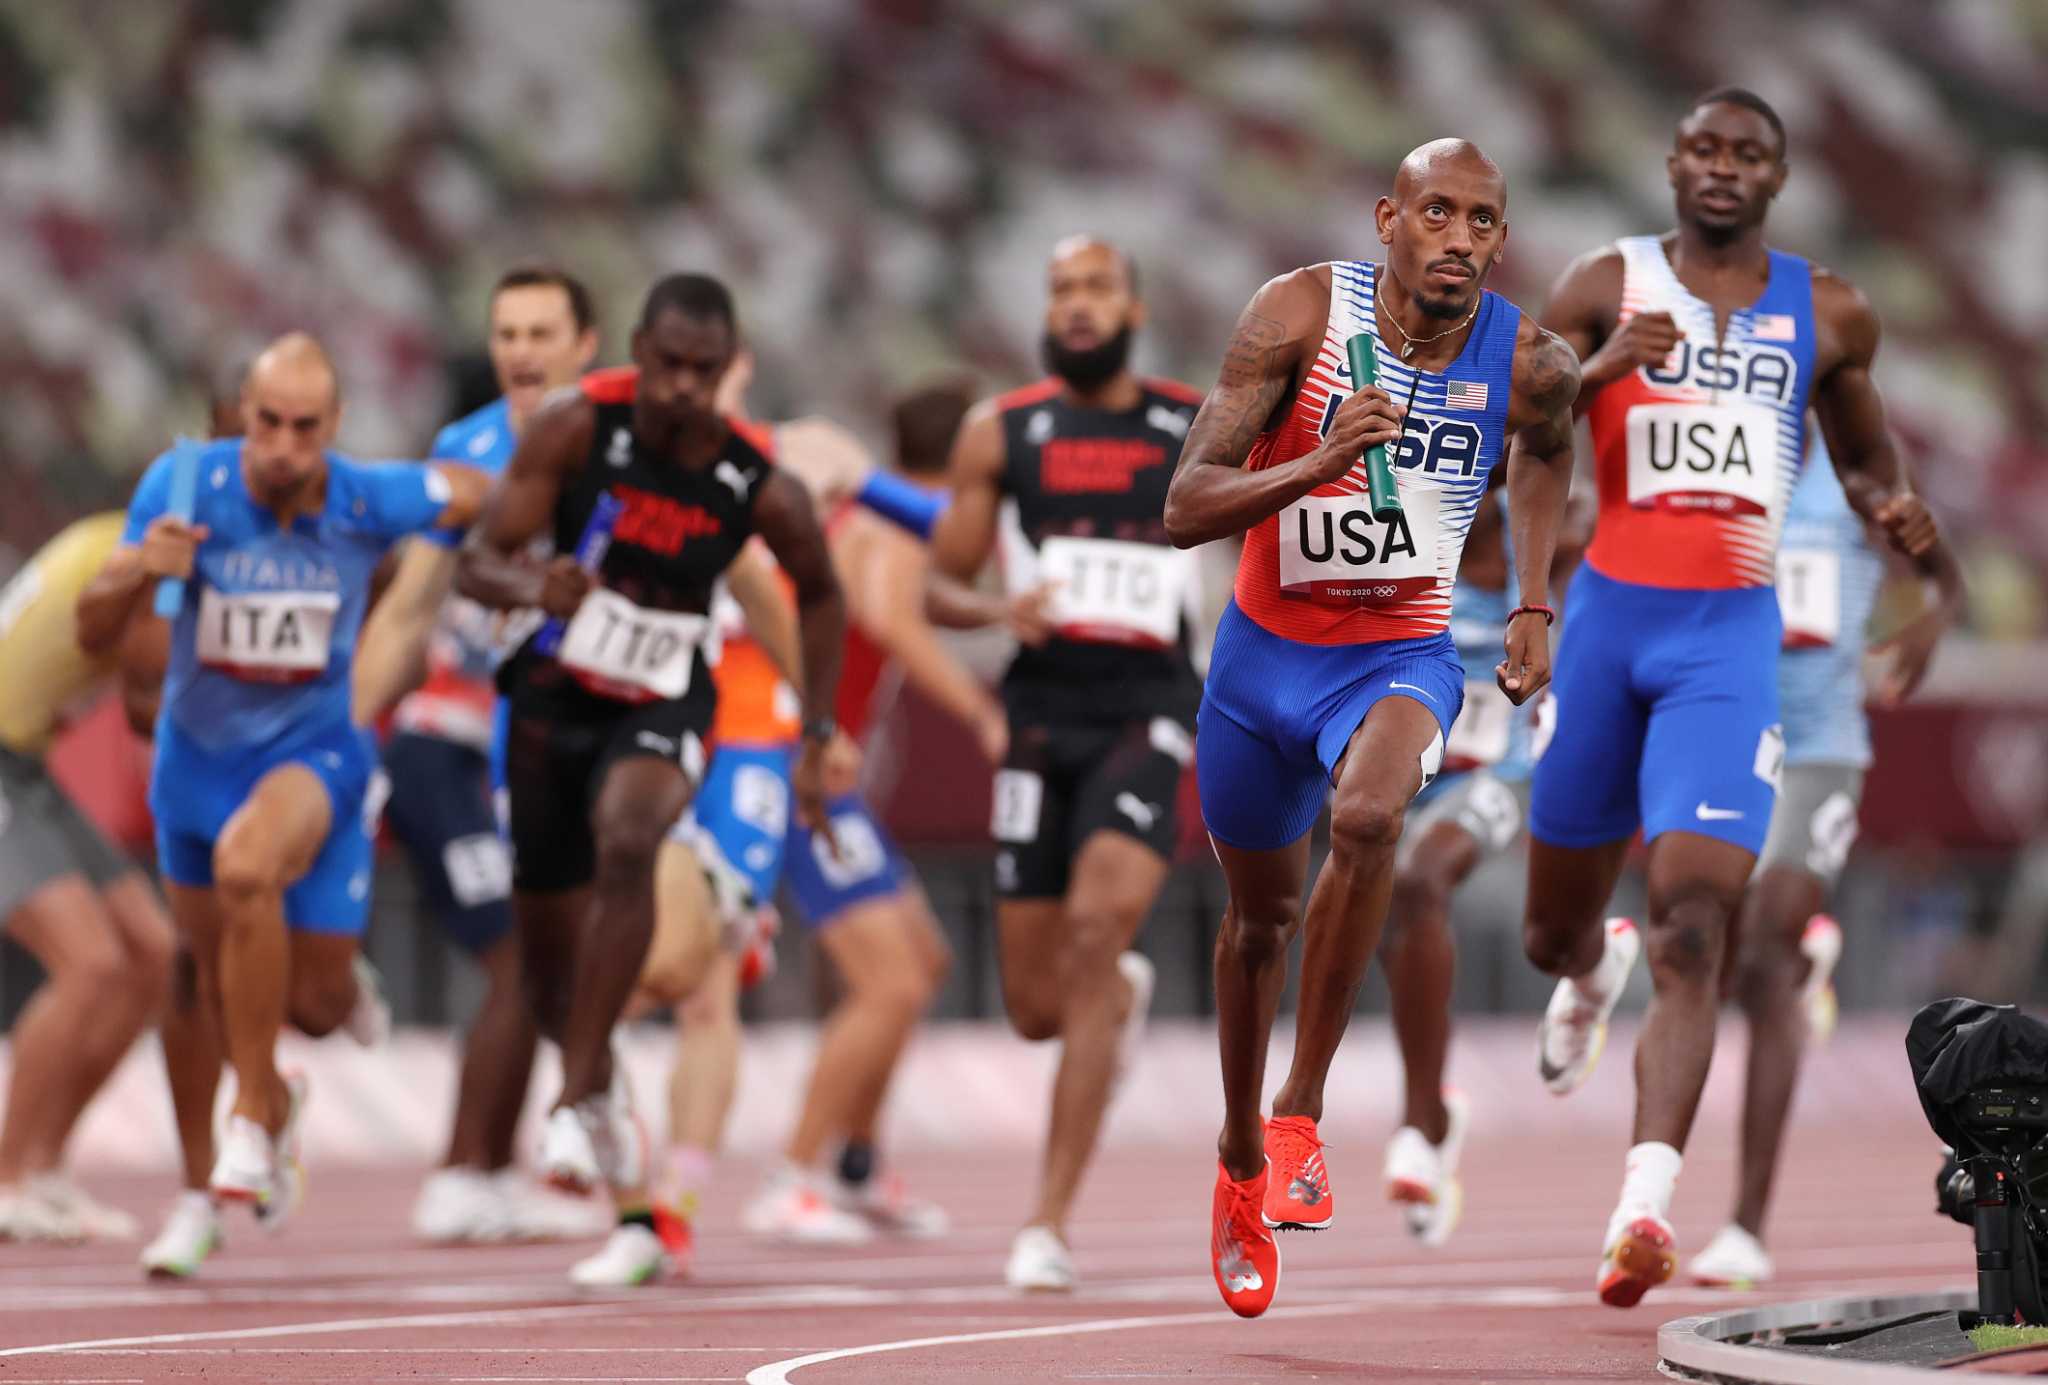 U.S. men’s 4x400 relay advances with only a touch of controversy